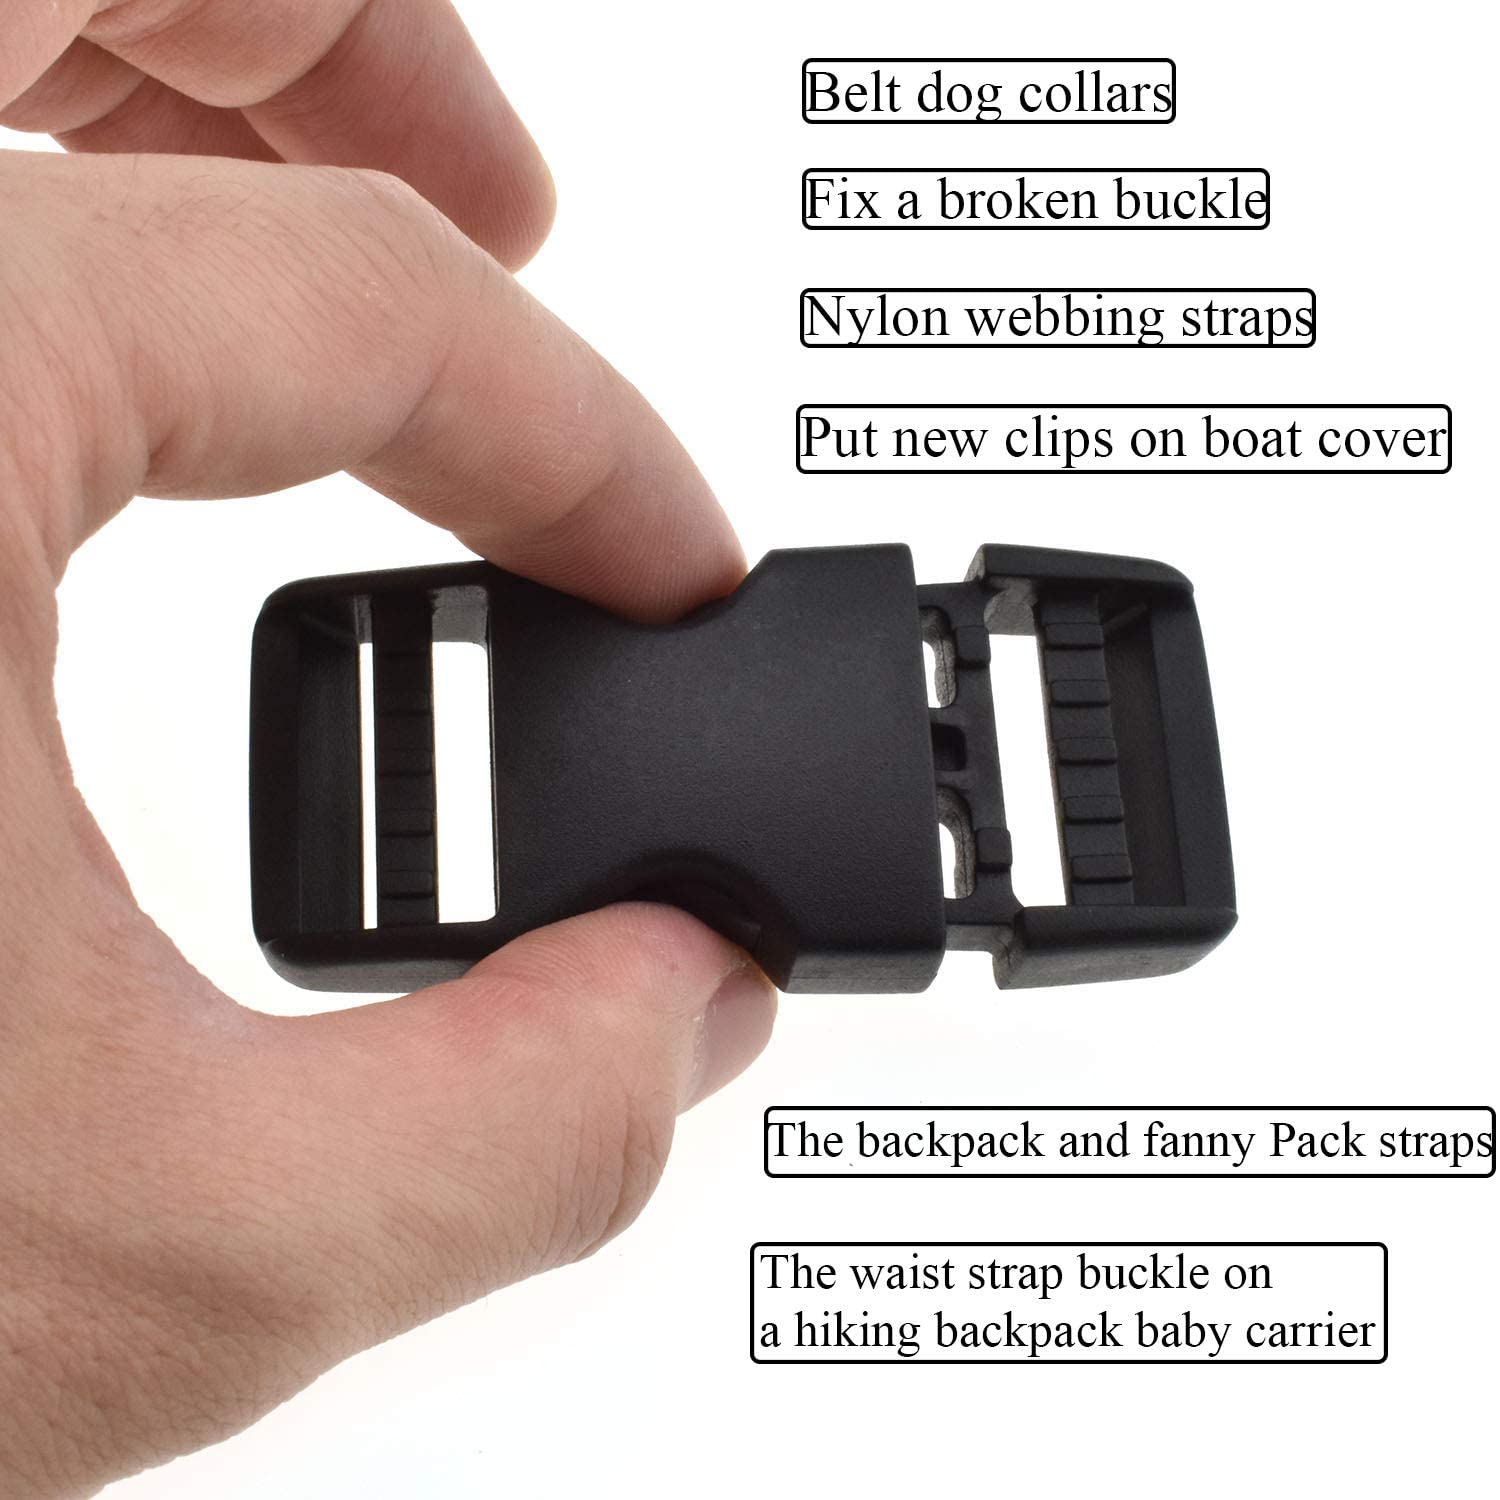 SGH Pro Quick Side Release Buckles 1" Wide 4 Pack Dual Adjustable No Sewing Clips Snaps Heavy Duty Plastic Replacement for Nylon Strap Boat Cover Backpack Fanny Pack Nylon Webbing Belt Dog Collars